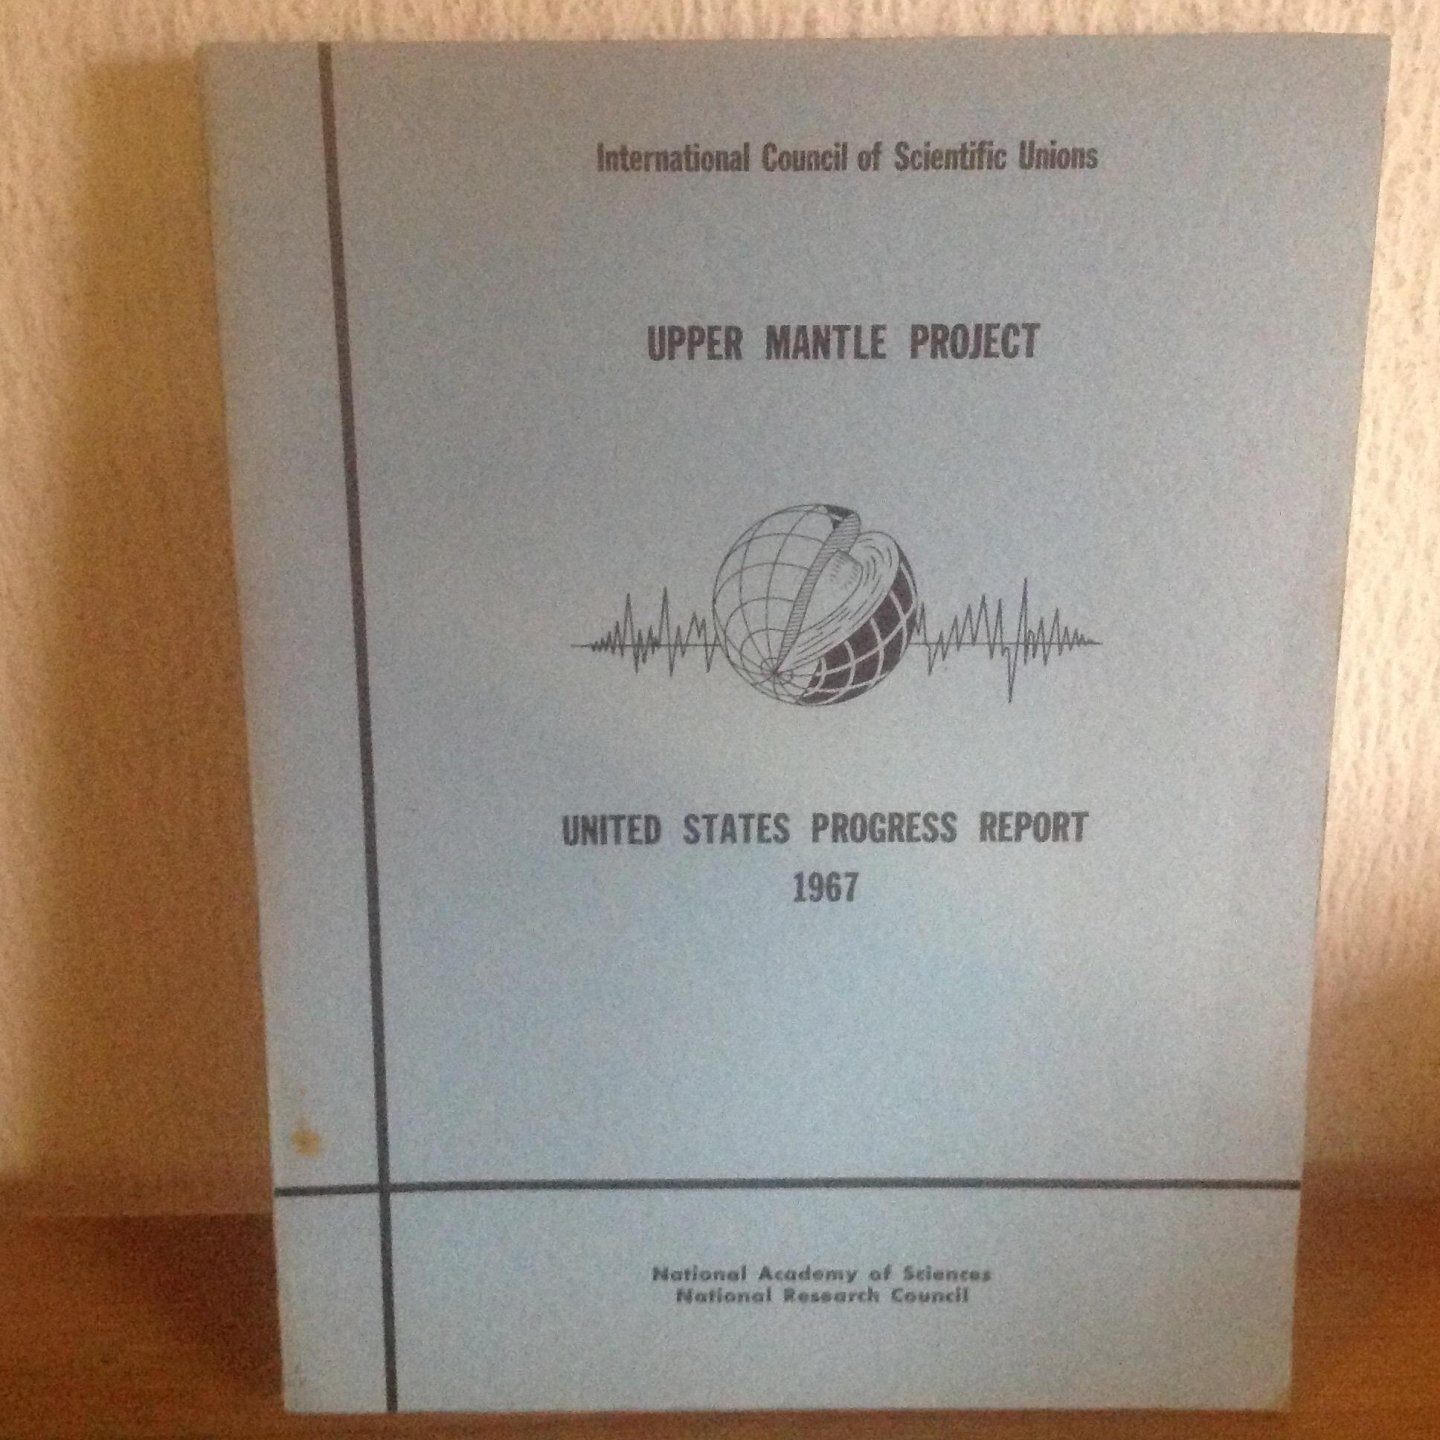  - Upper mantle project ,united States Progress Report 1967